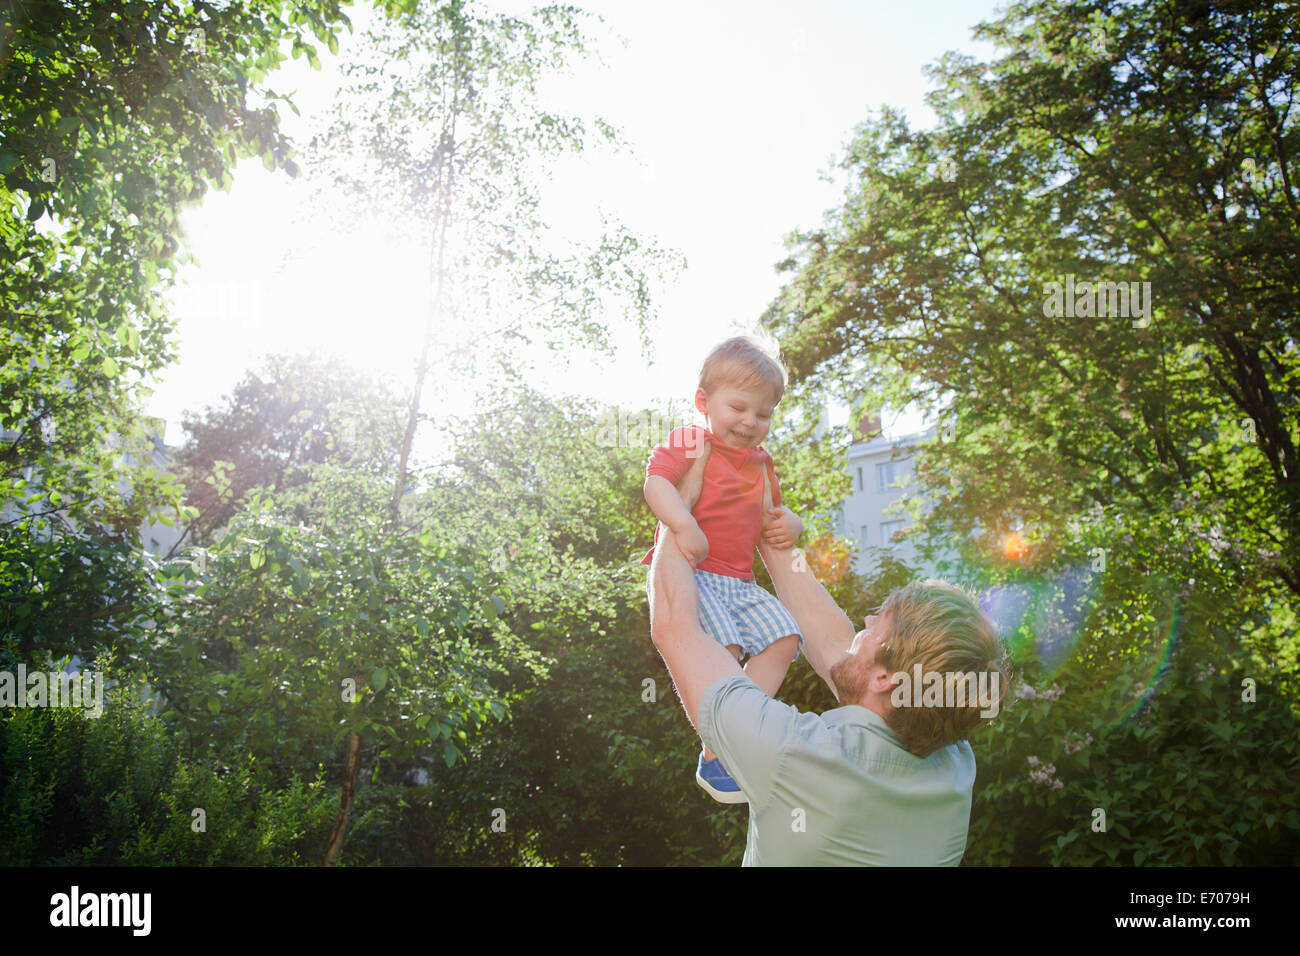 Father holding up toddler son in park Stock Photo